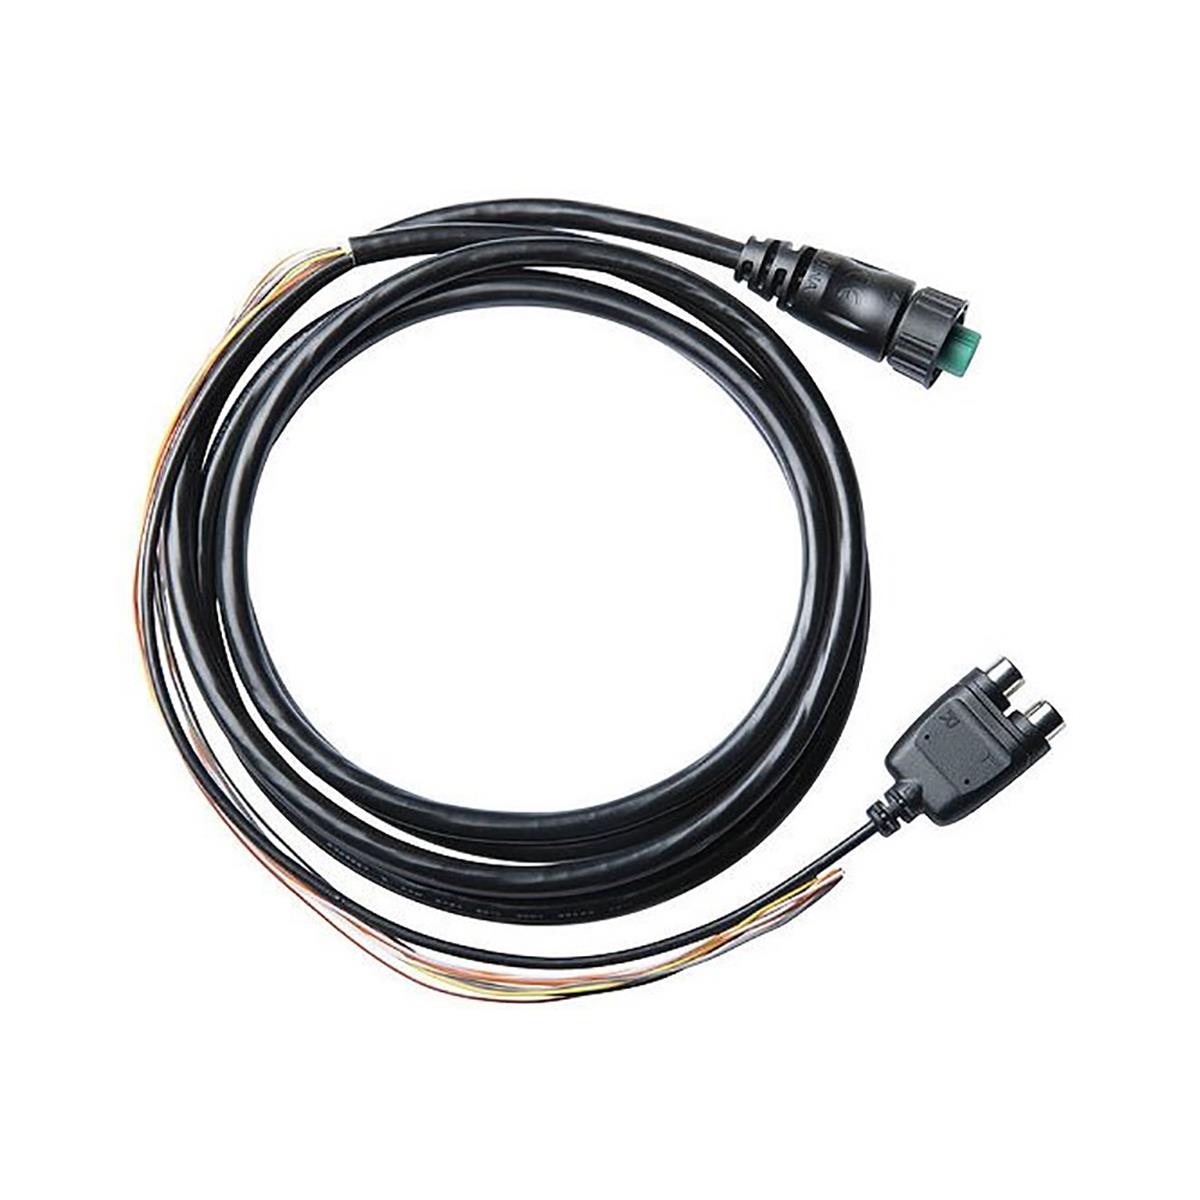 Picture of Garmin 010-12852-00 NMEA 0183 with Audio Cable